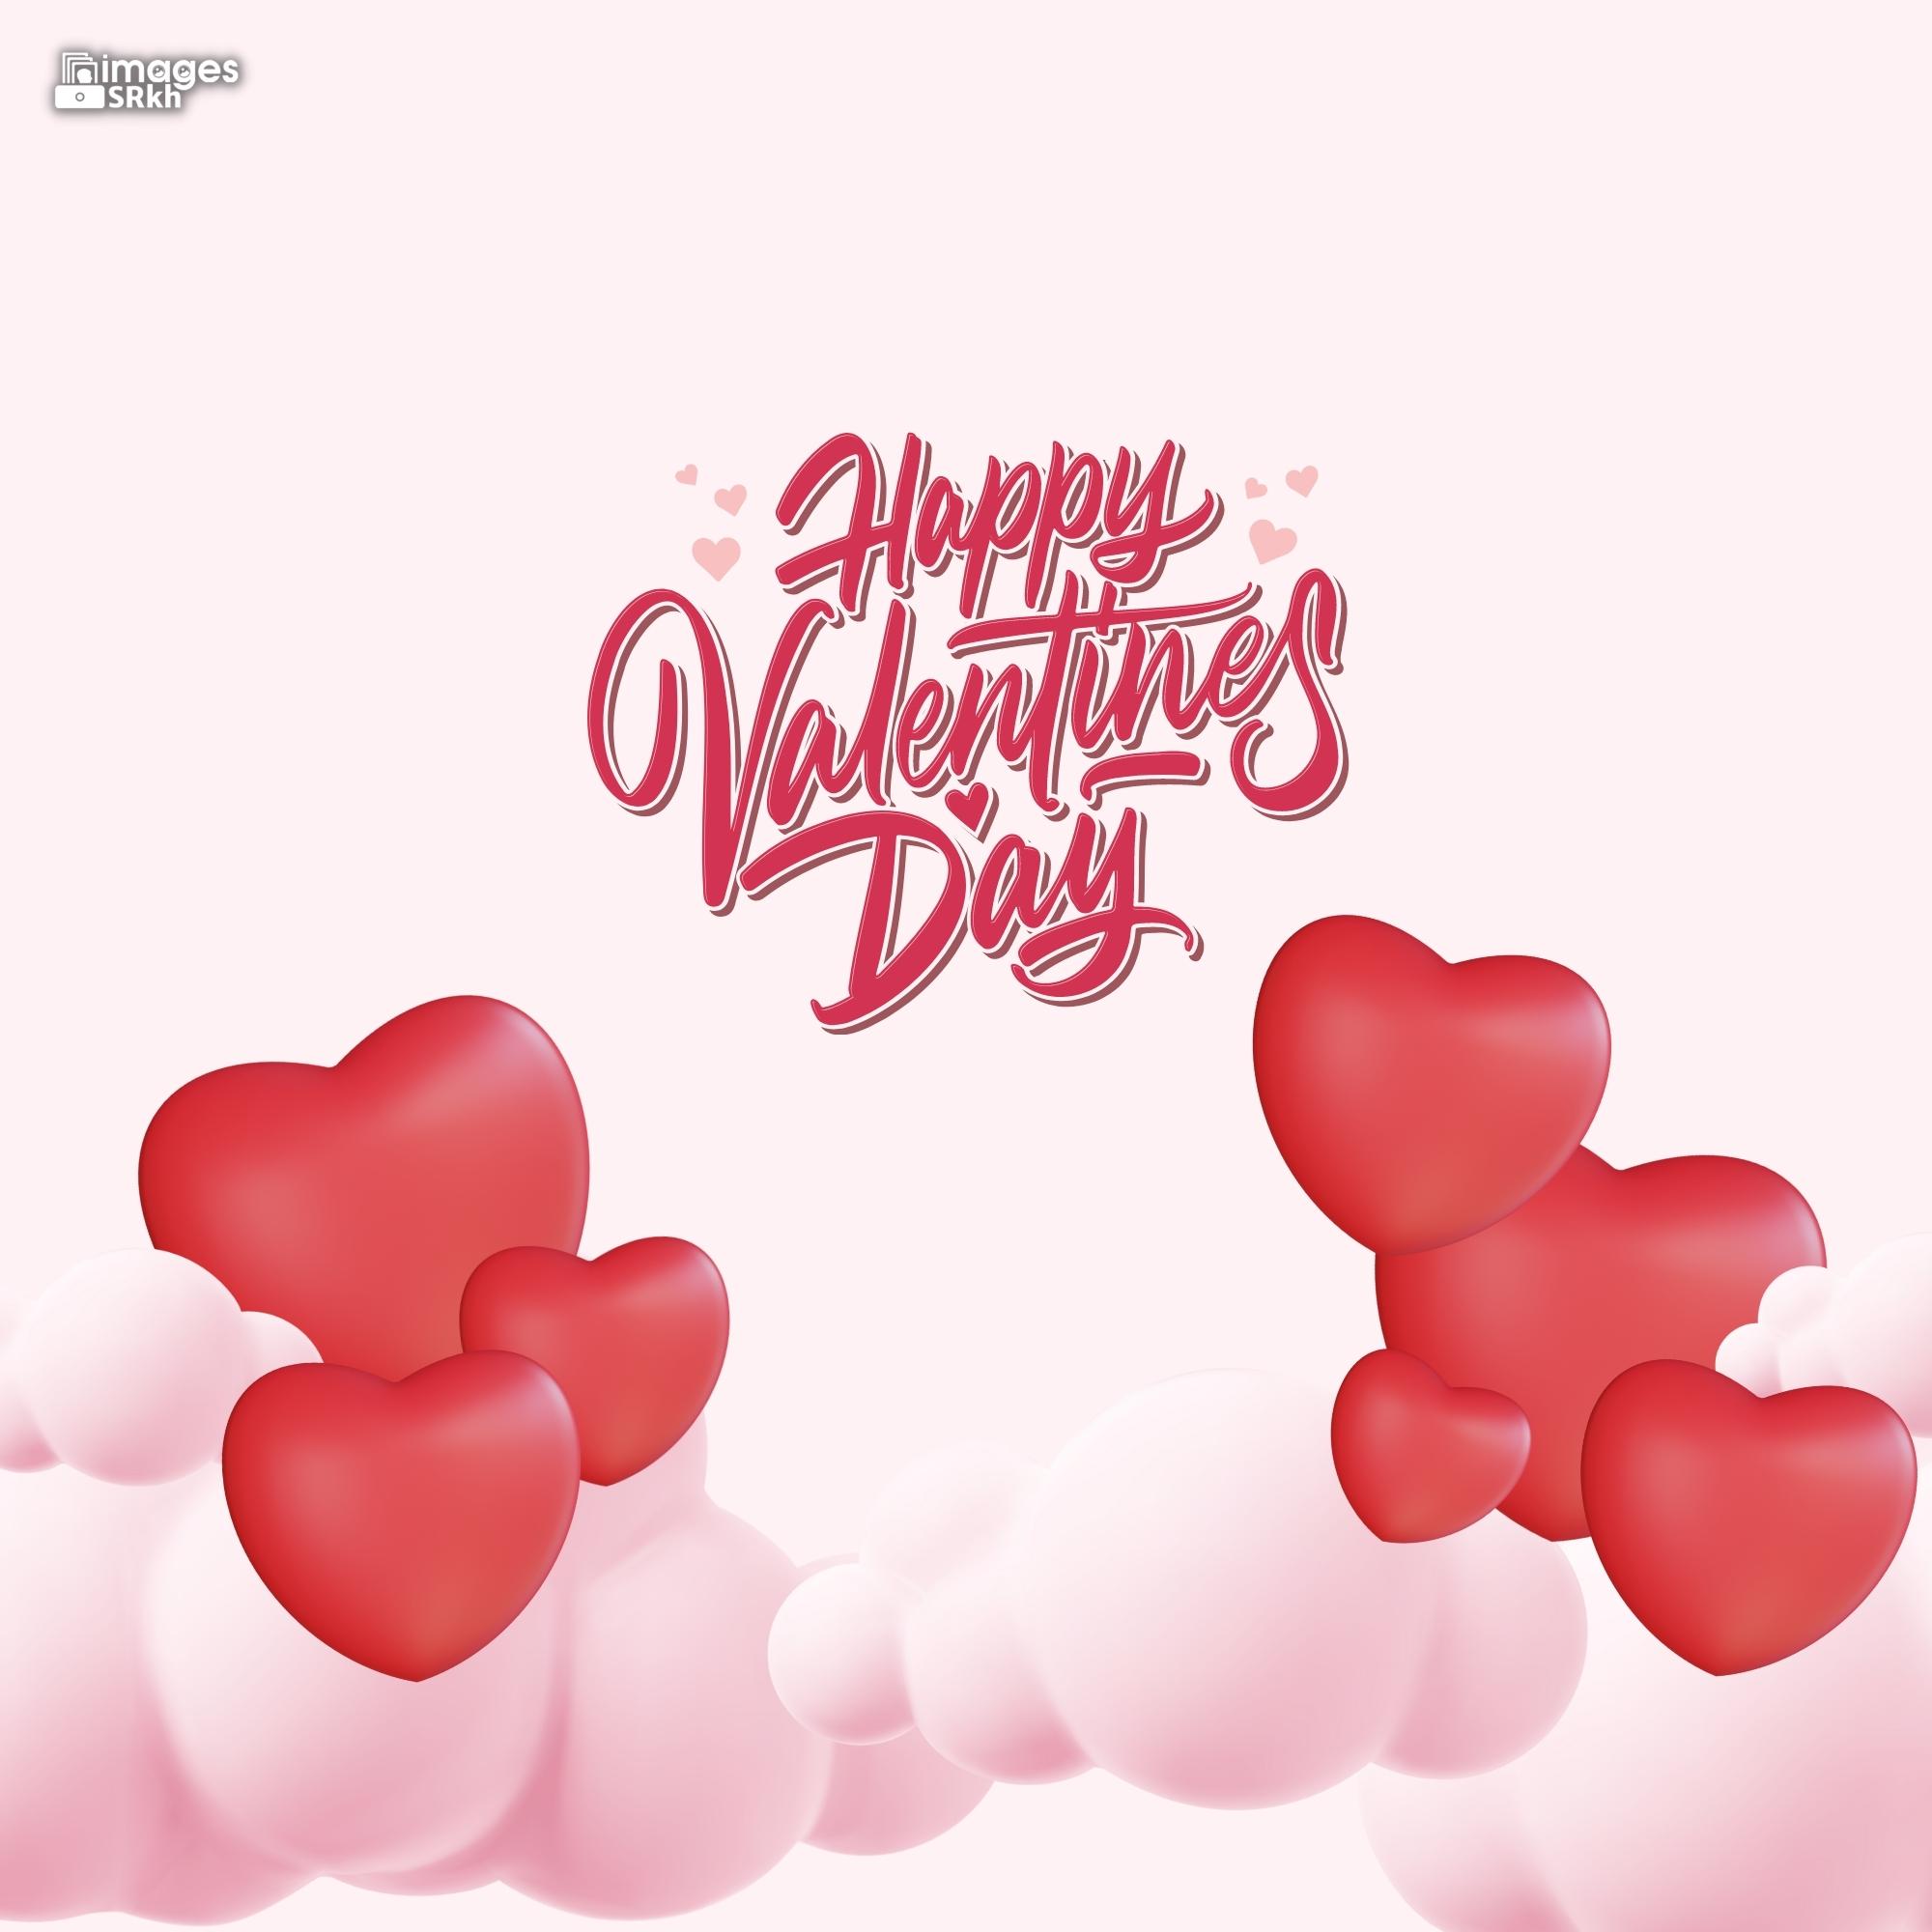 Happy Valentines Day | 535 | PREMIUM IMAGES | Wishes for Love